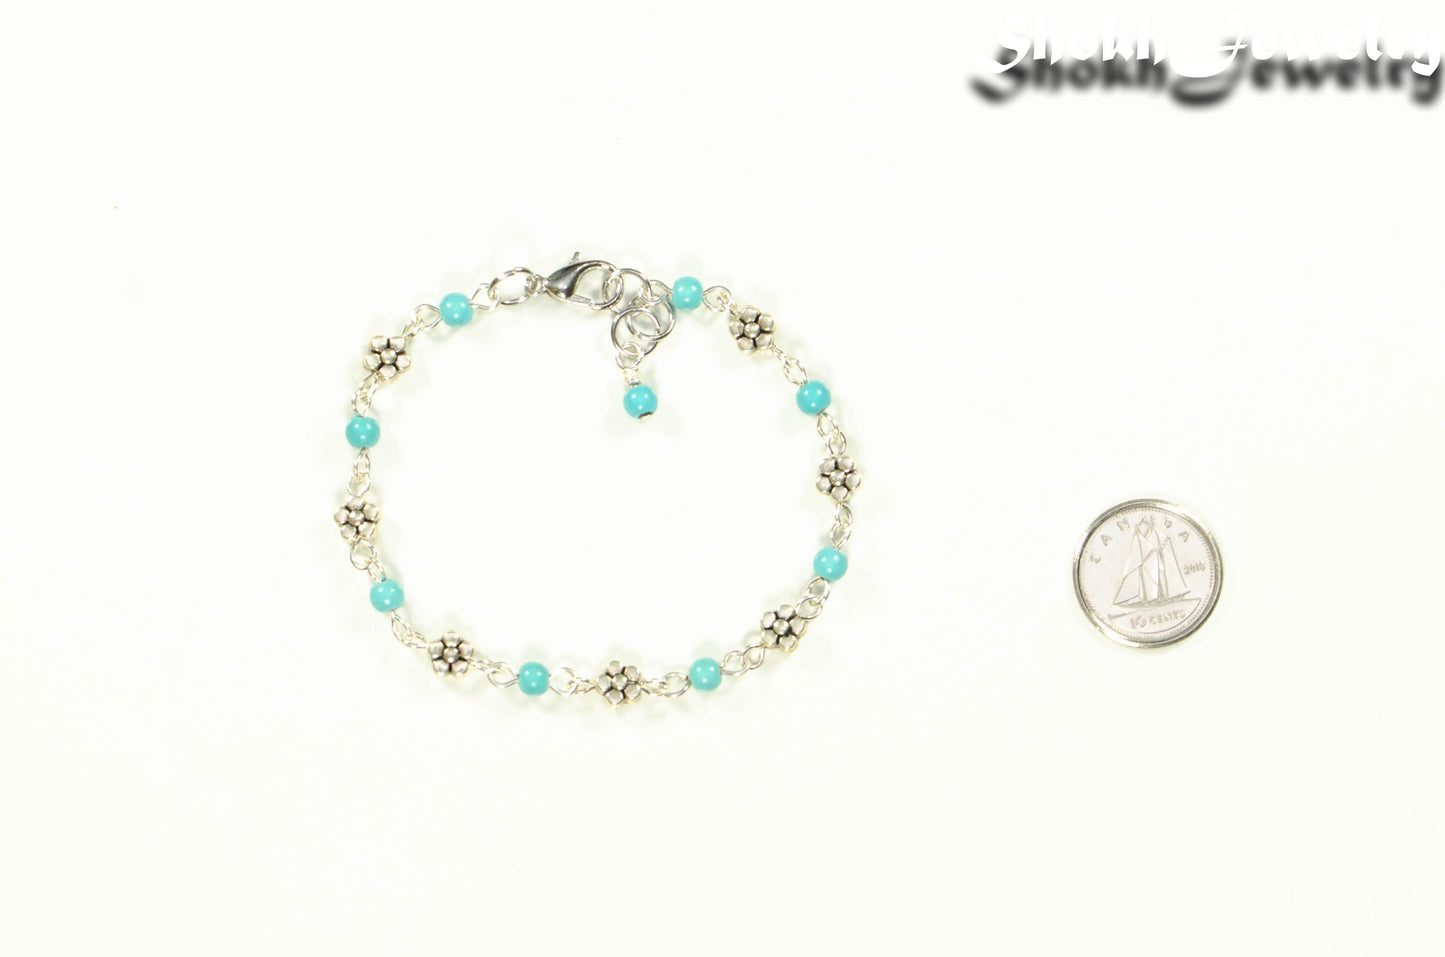 Tibetan Silver Flower and Turquoise Howlite Link Bracelet beside a dime.